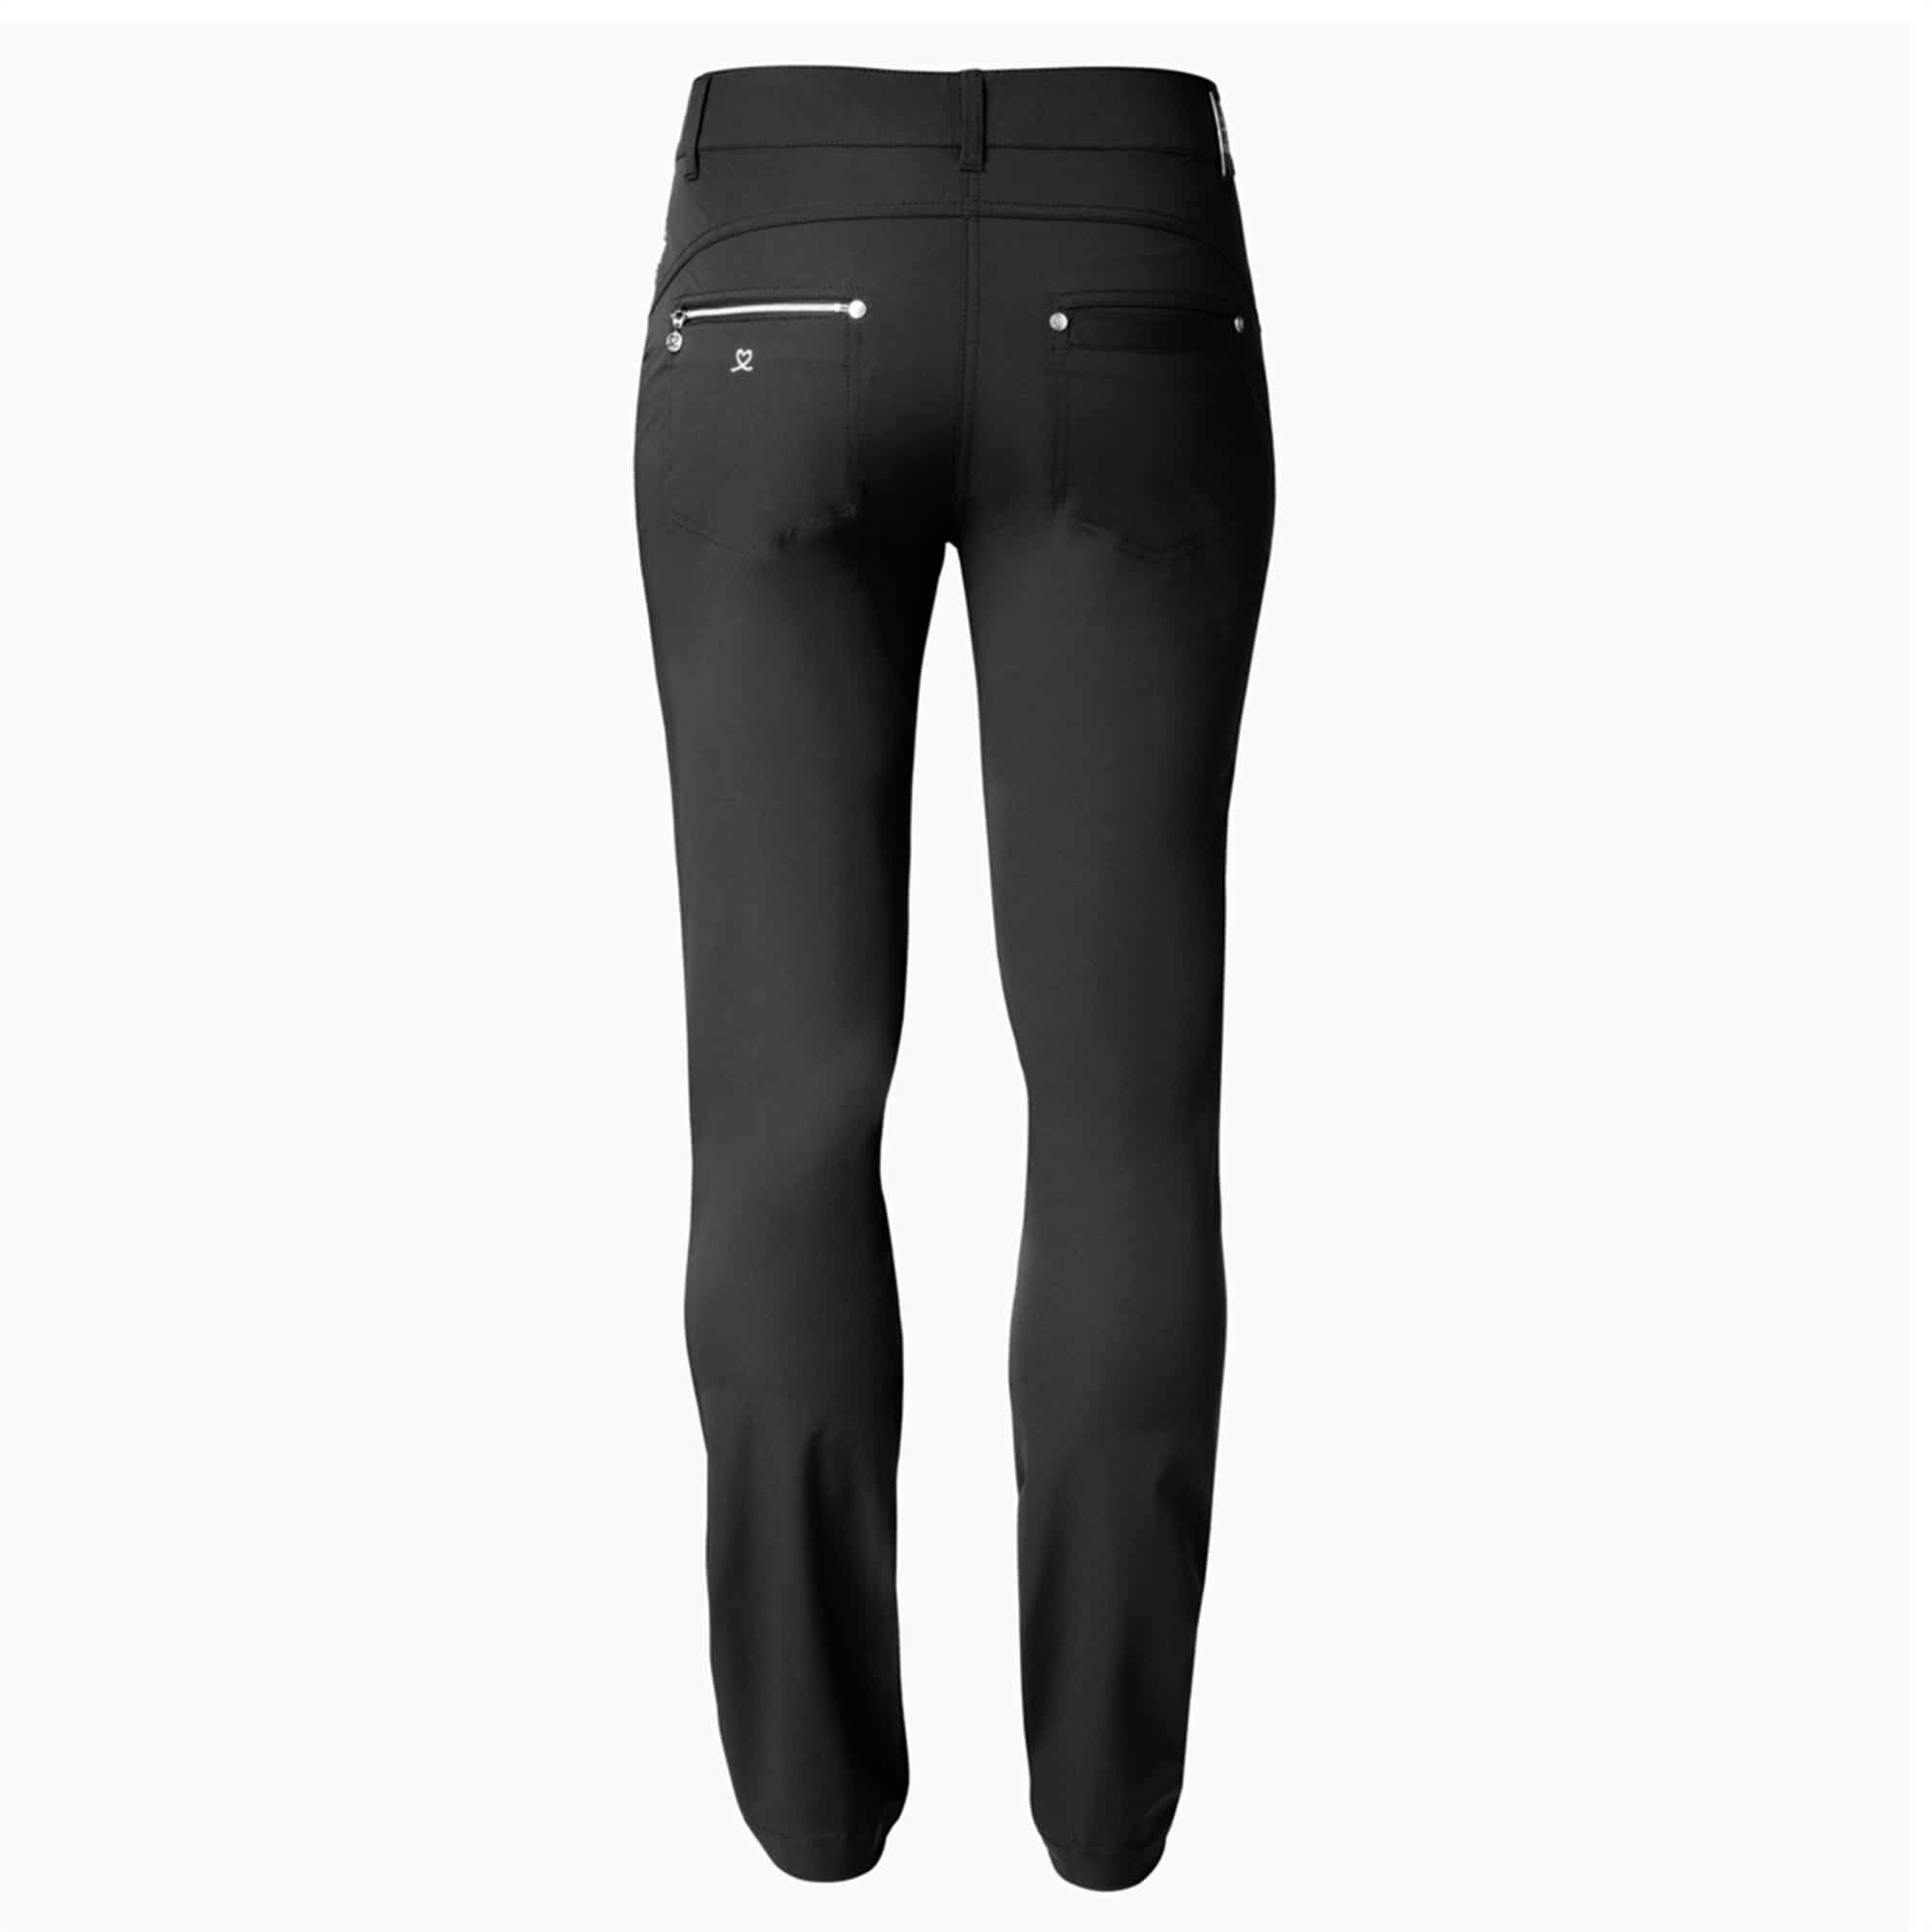 Daily Sports Magic Pants 29 Inch - Trousers